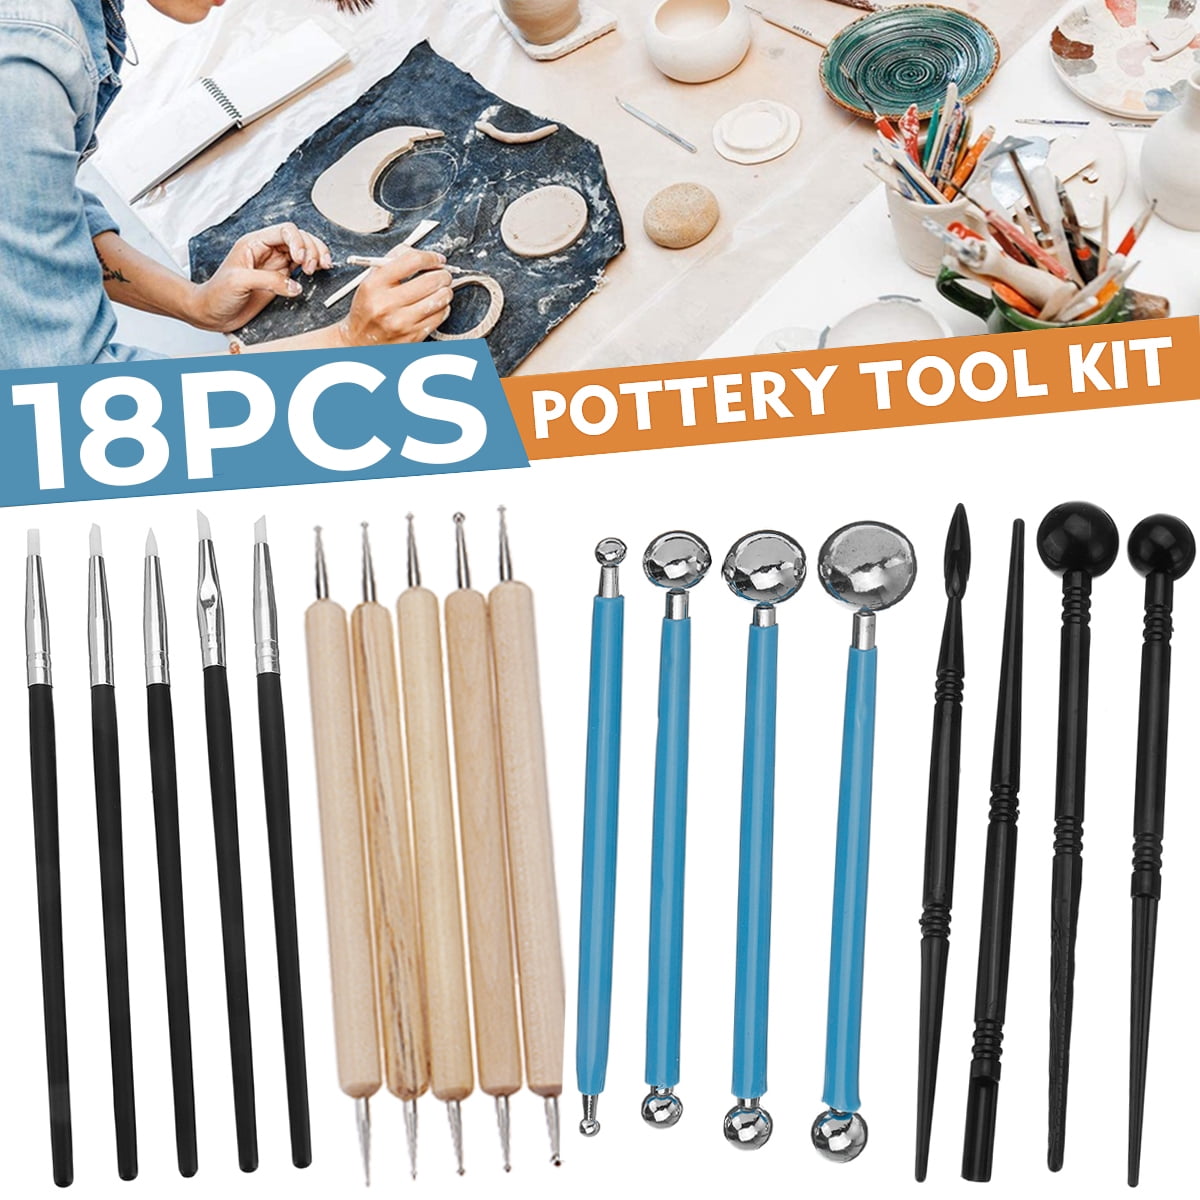 Ball Stylus Dotting Tools,Sowereap 18 pcs Modeling Clay Sculpting Tools for Pottery Sculpture Plastic Paper Flowers Rock Art Carving Modeling Embossing Sets 